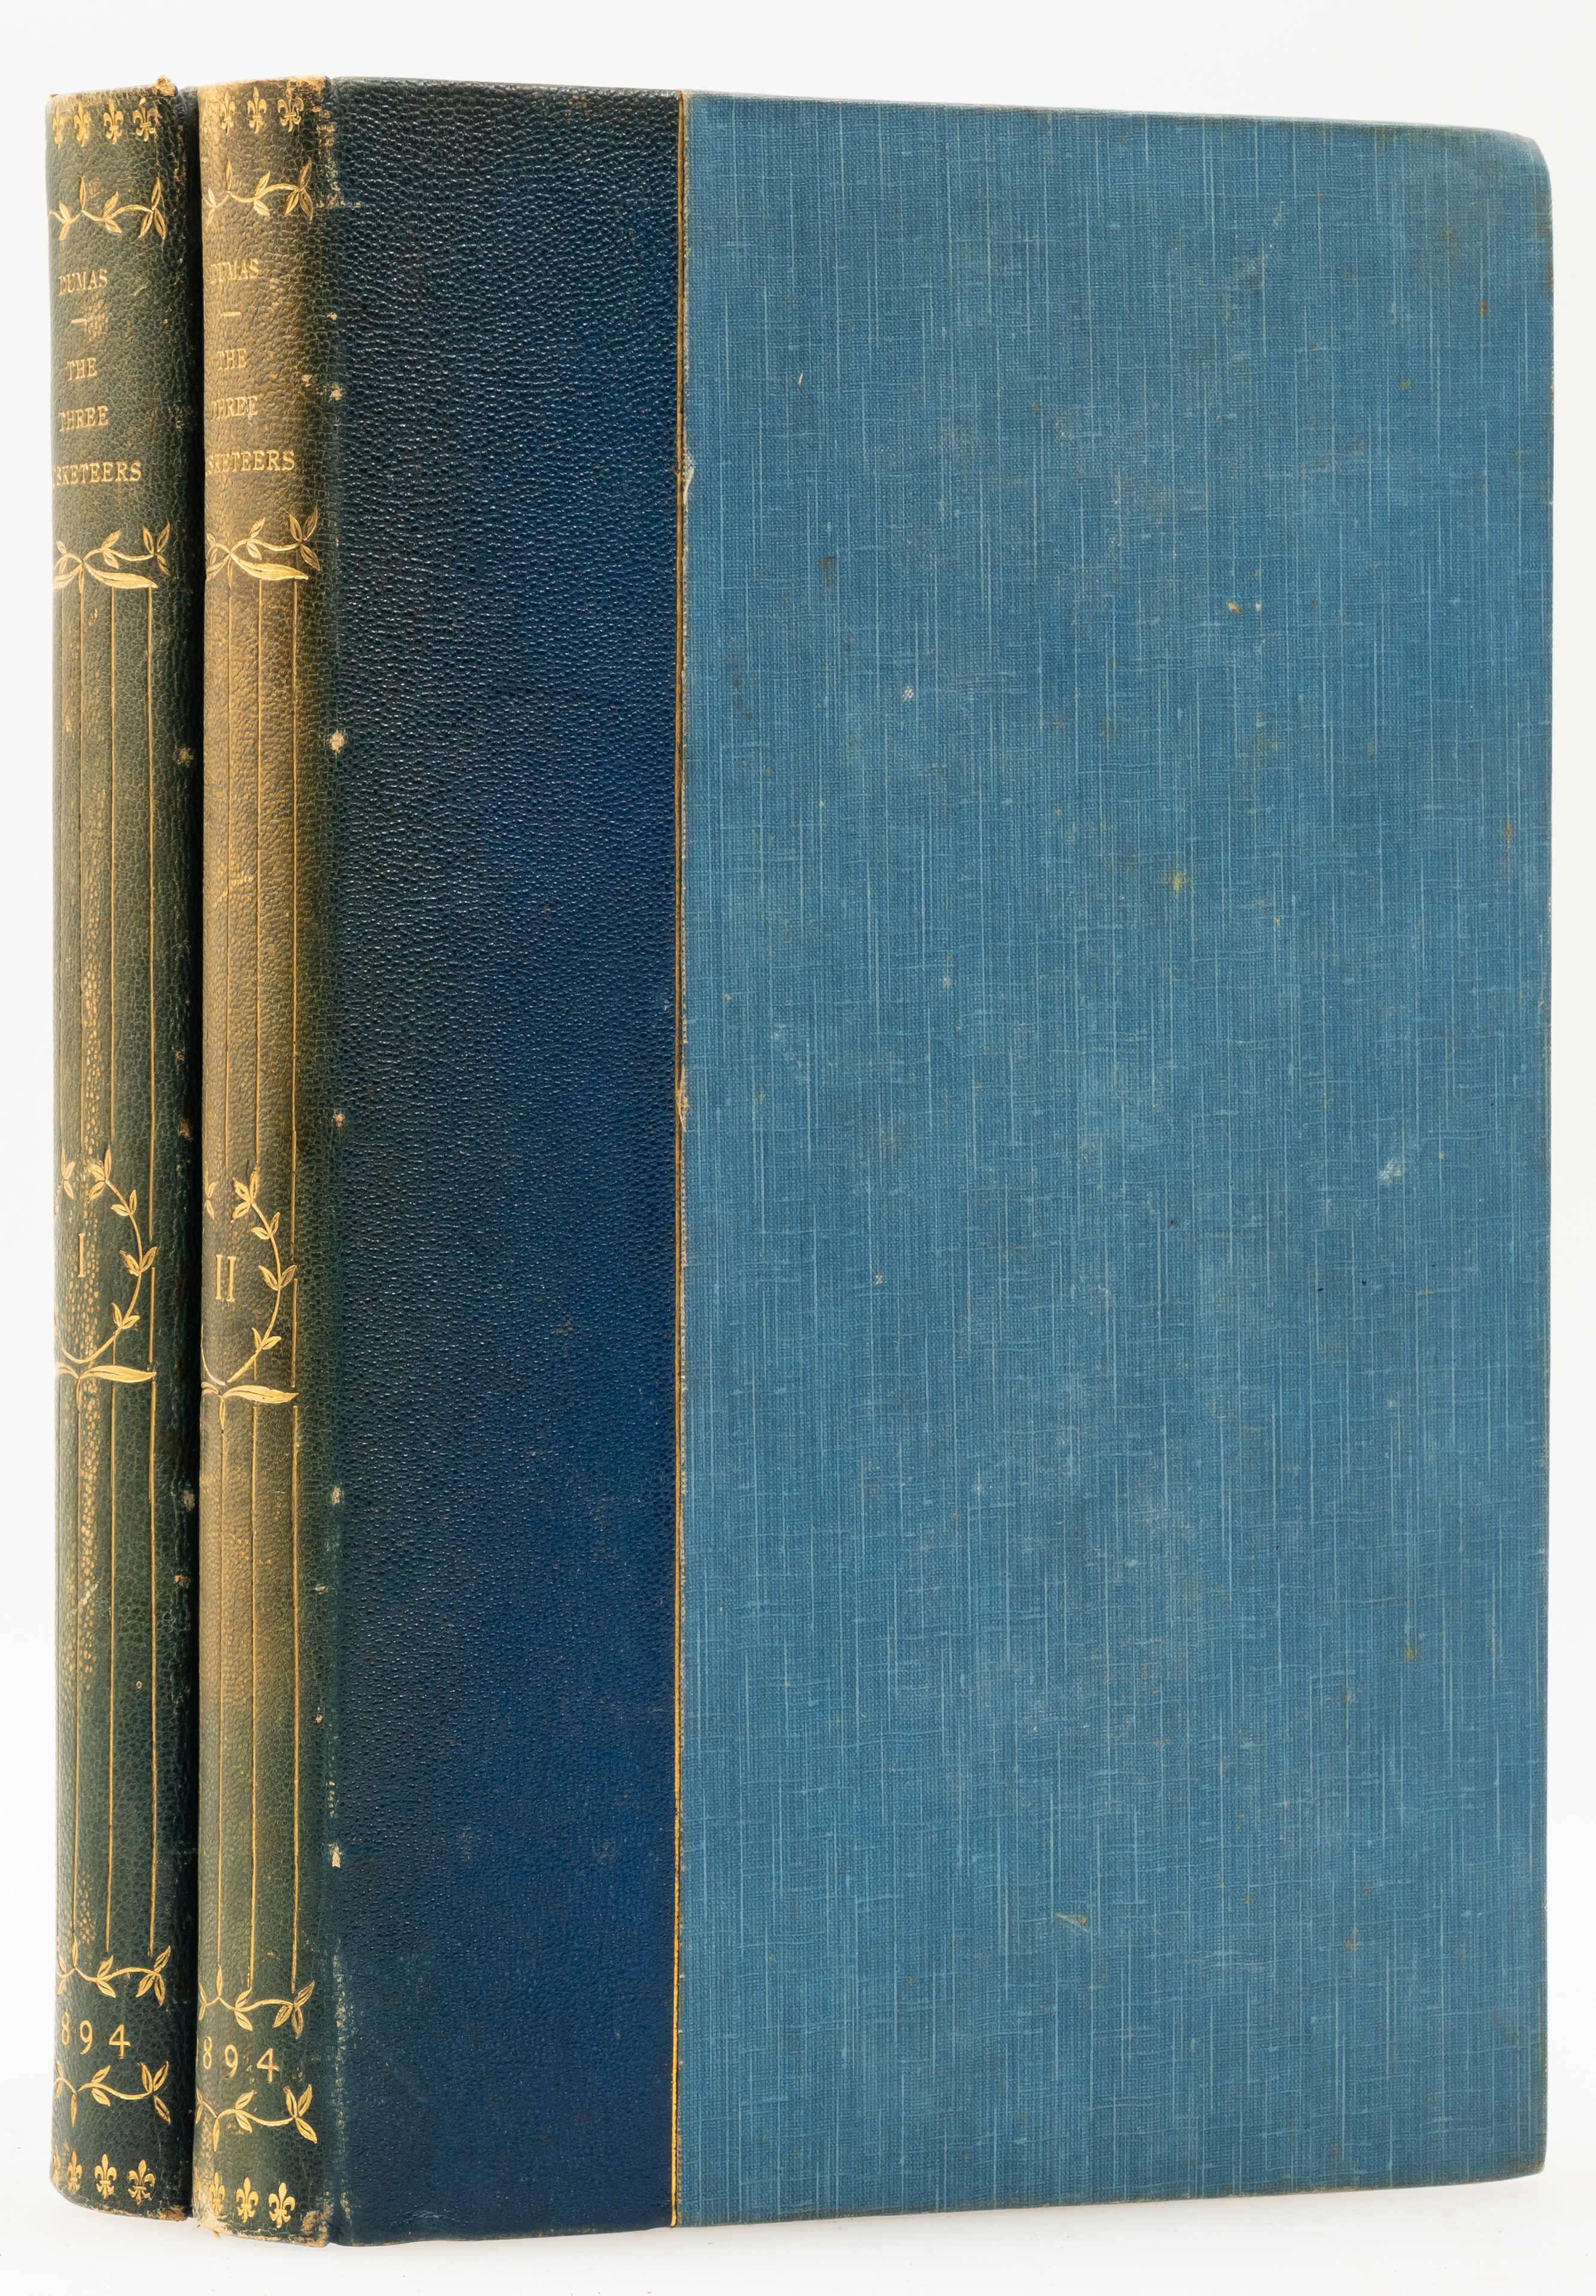 Dumas (Alexandre) The Three Musketeers, 2 vol., edition de luxe, one of 750 copies, 1894.